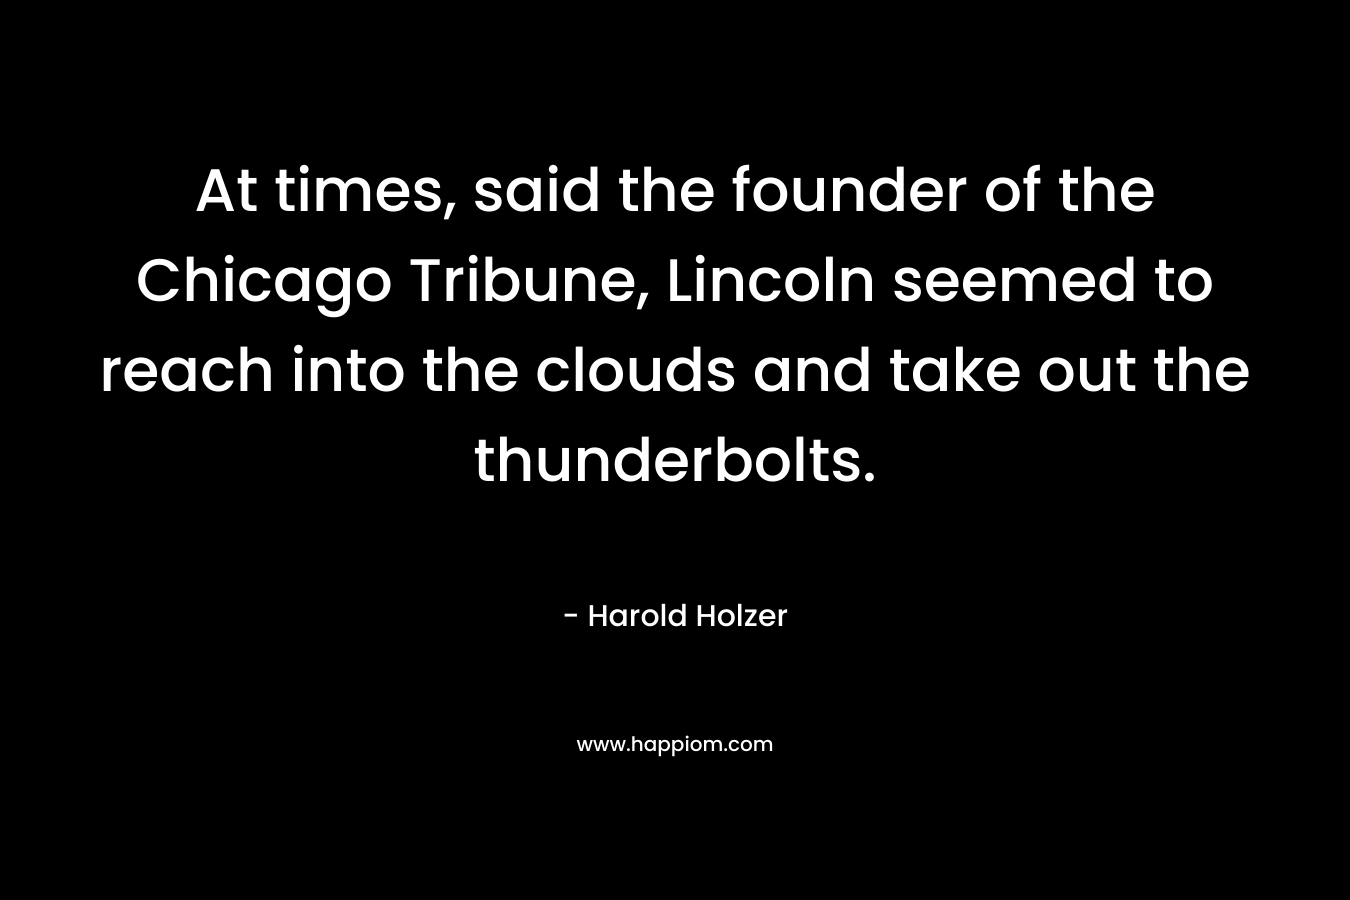 At times, said the founder of the Chicago Tribune, Lincoln seemed to reach into the clouds and take out the thunderbolts. – Harold Holzer